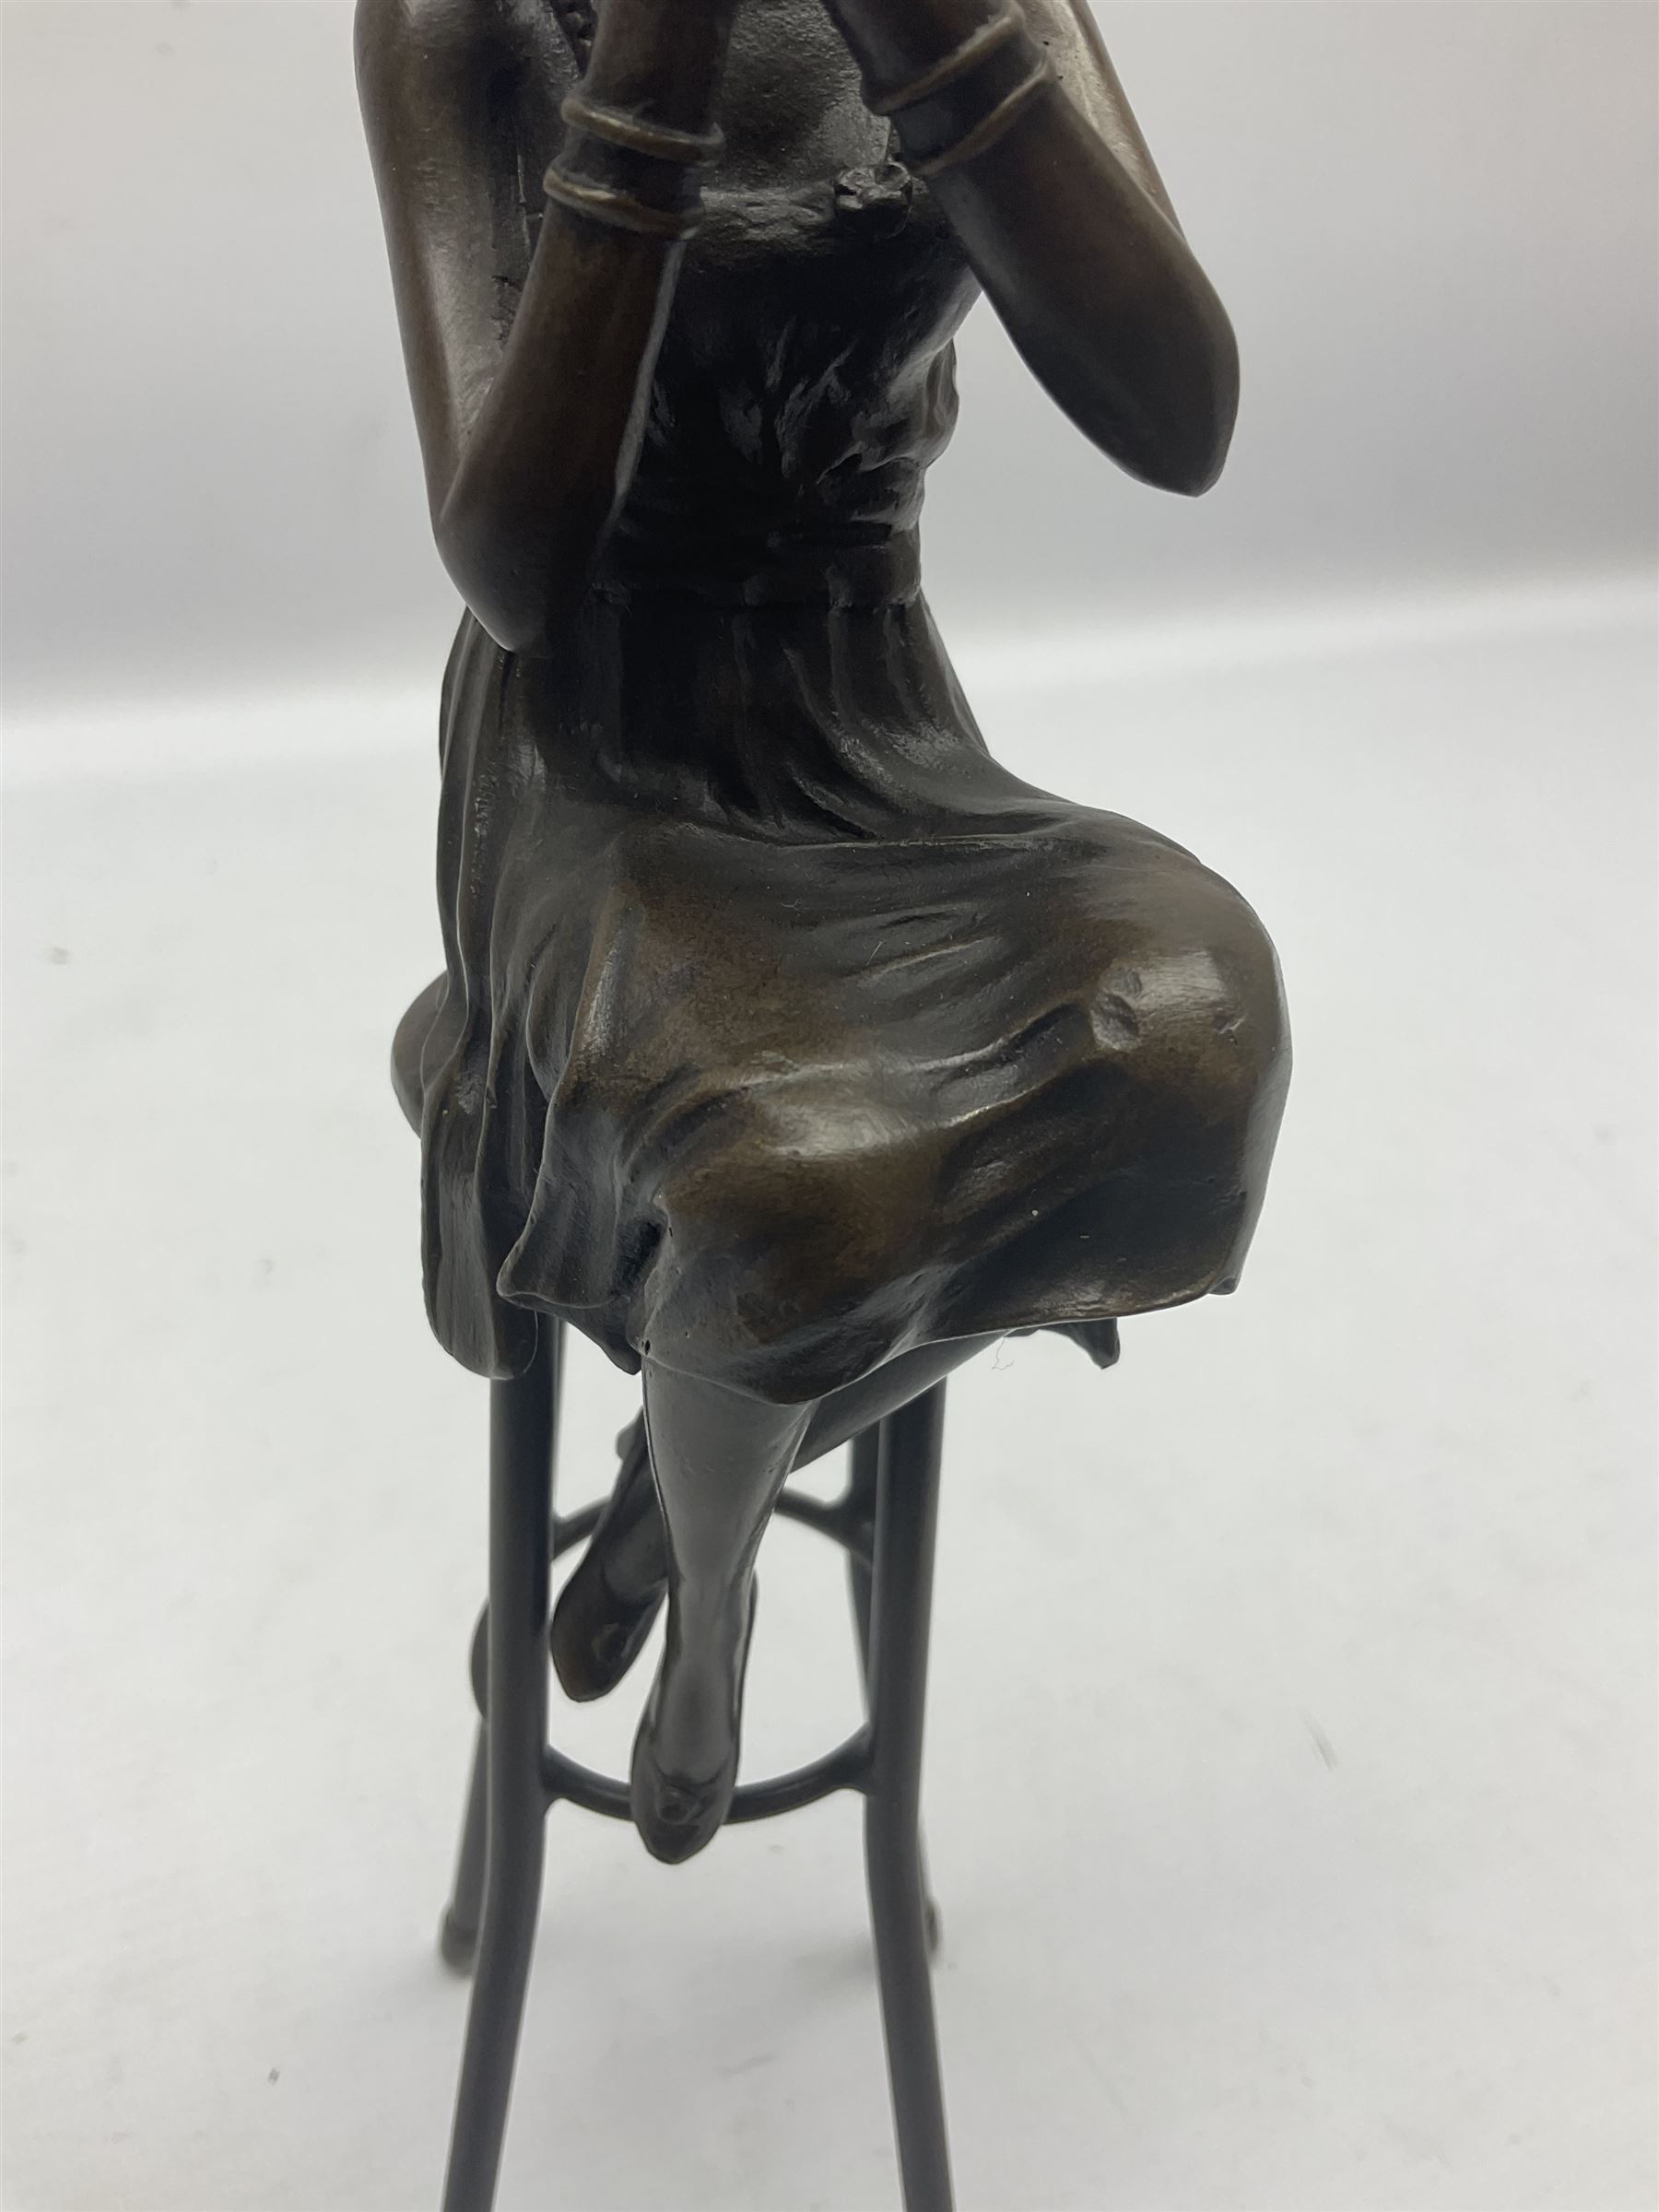 Art Deco style bronze figure of a lady seated on a stool applying lipstick - Image 6 of 7